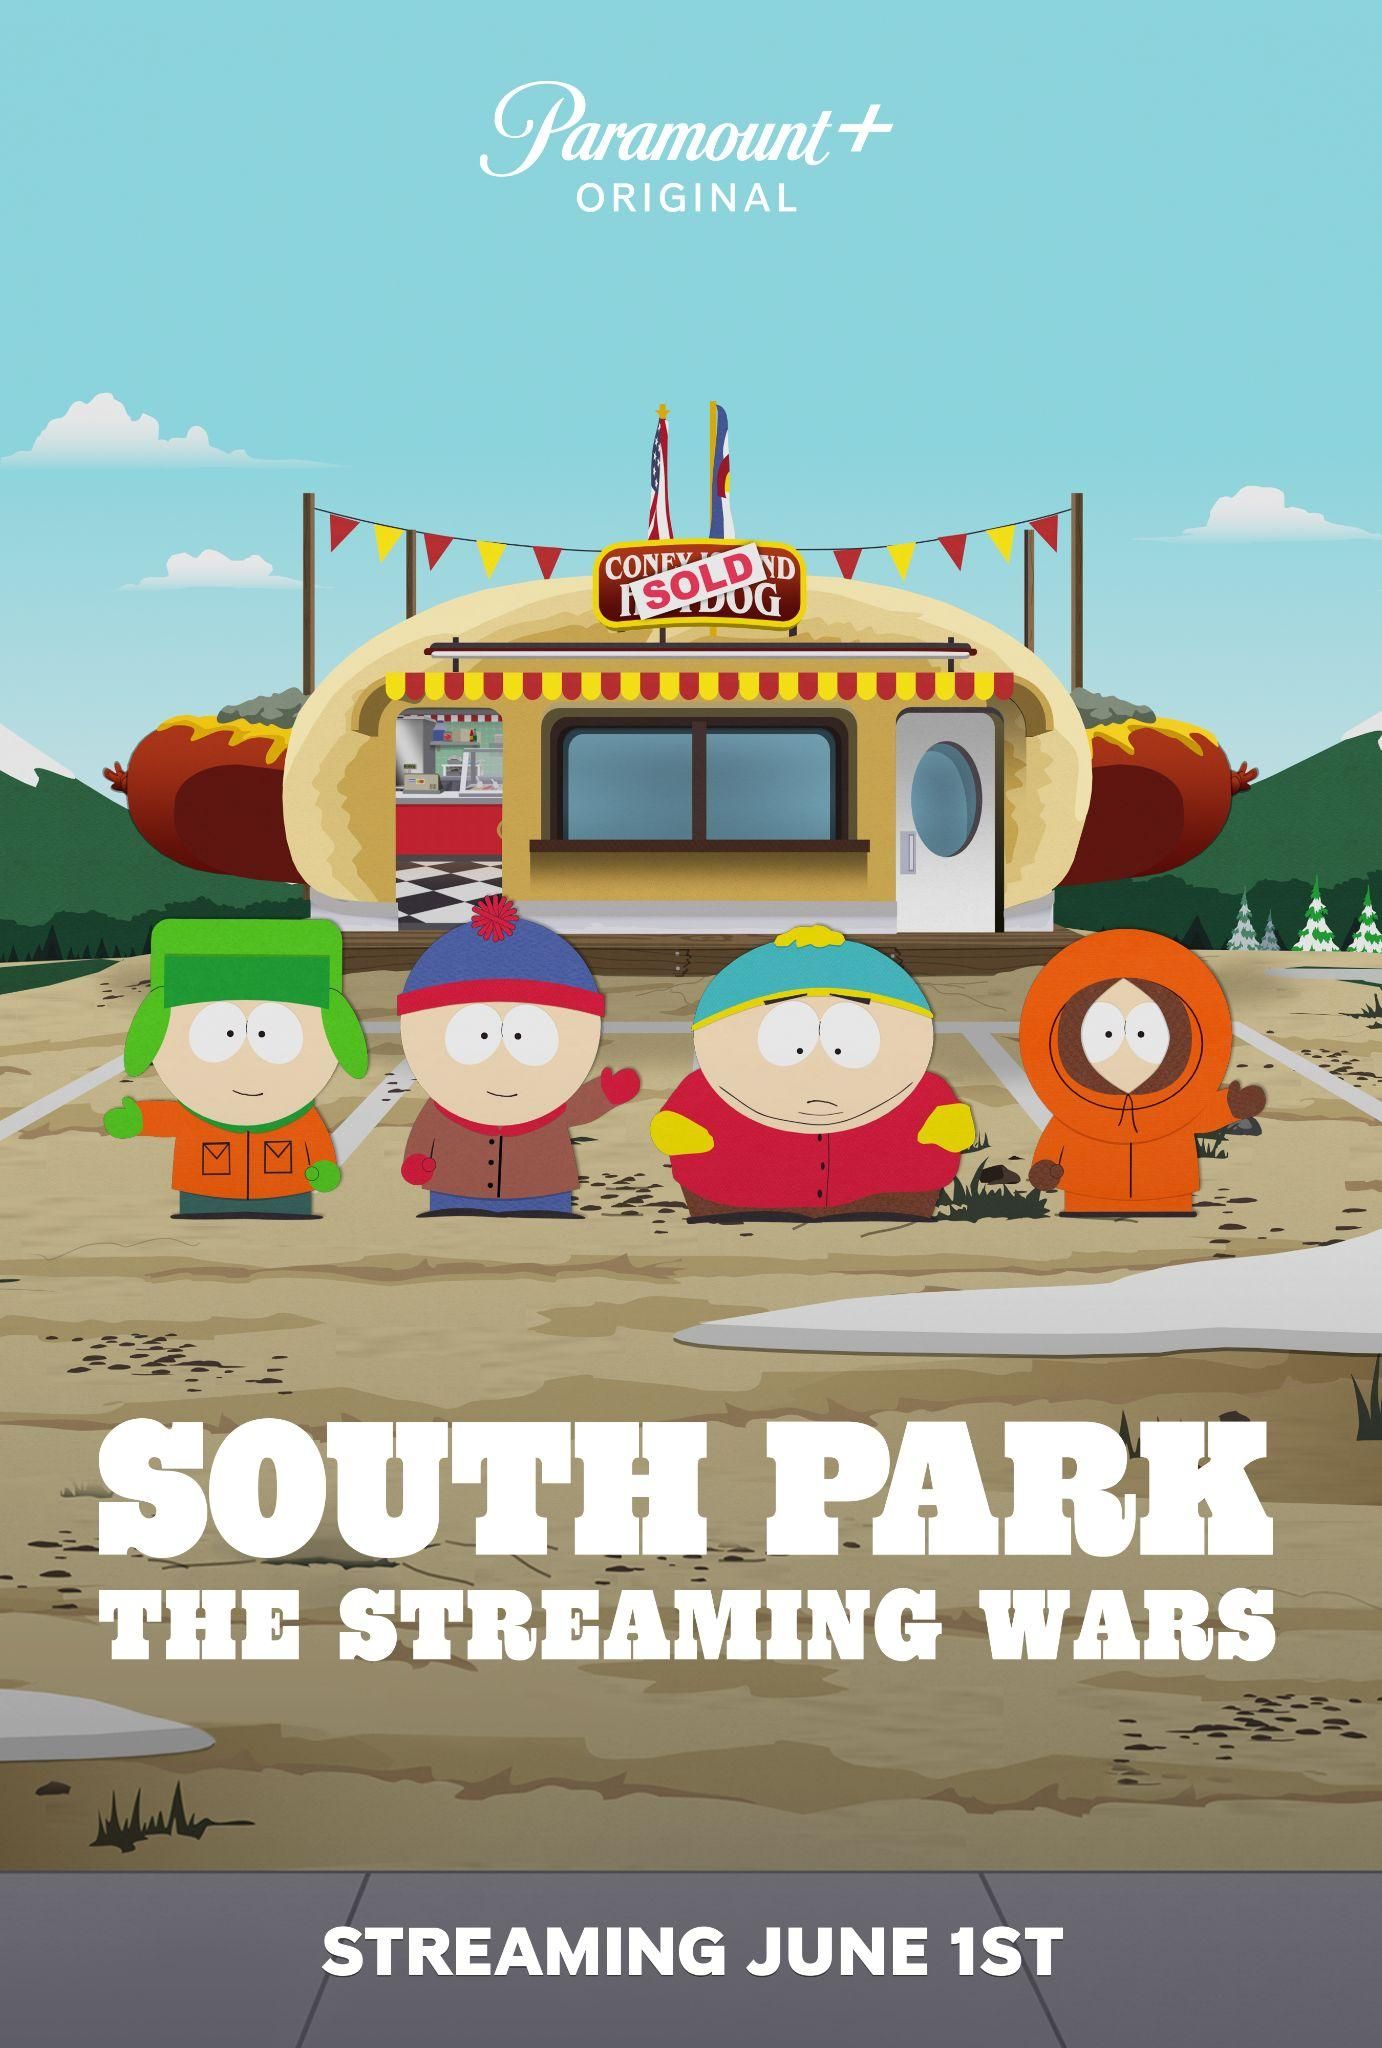 South Park Streaming Wars TV Show Trailer